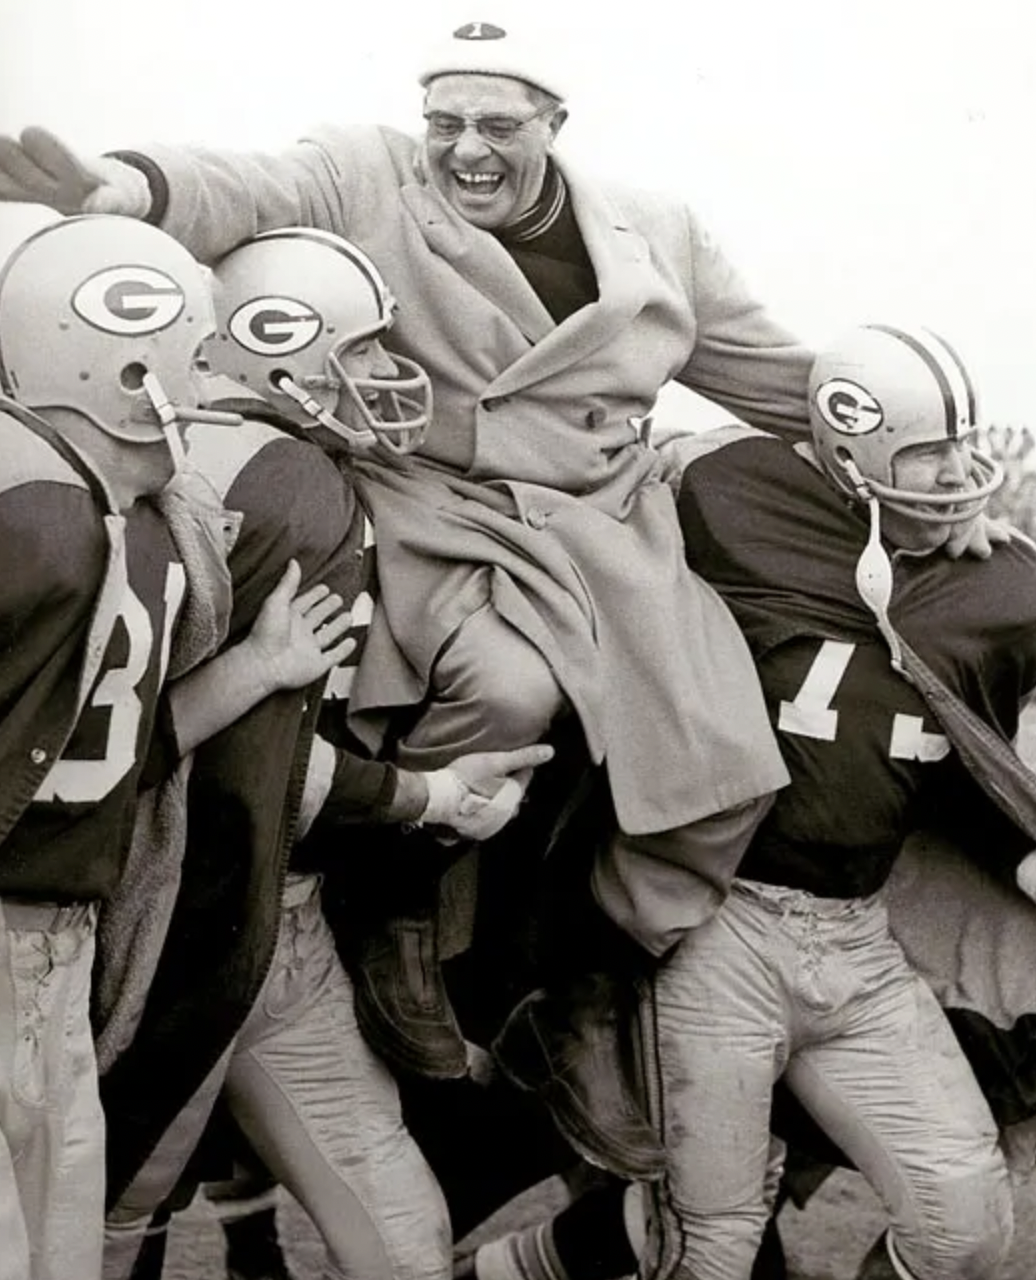 Vince Lombardi after winning his first title.